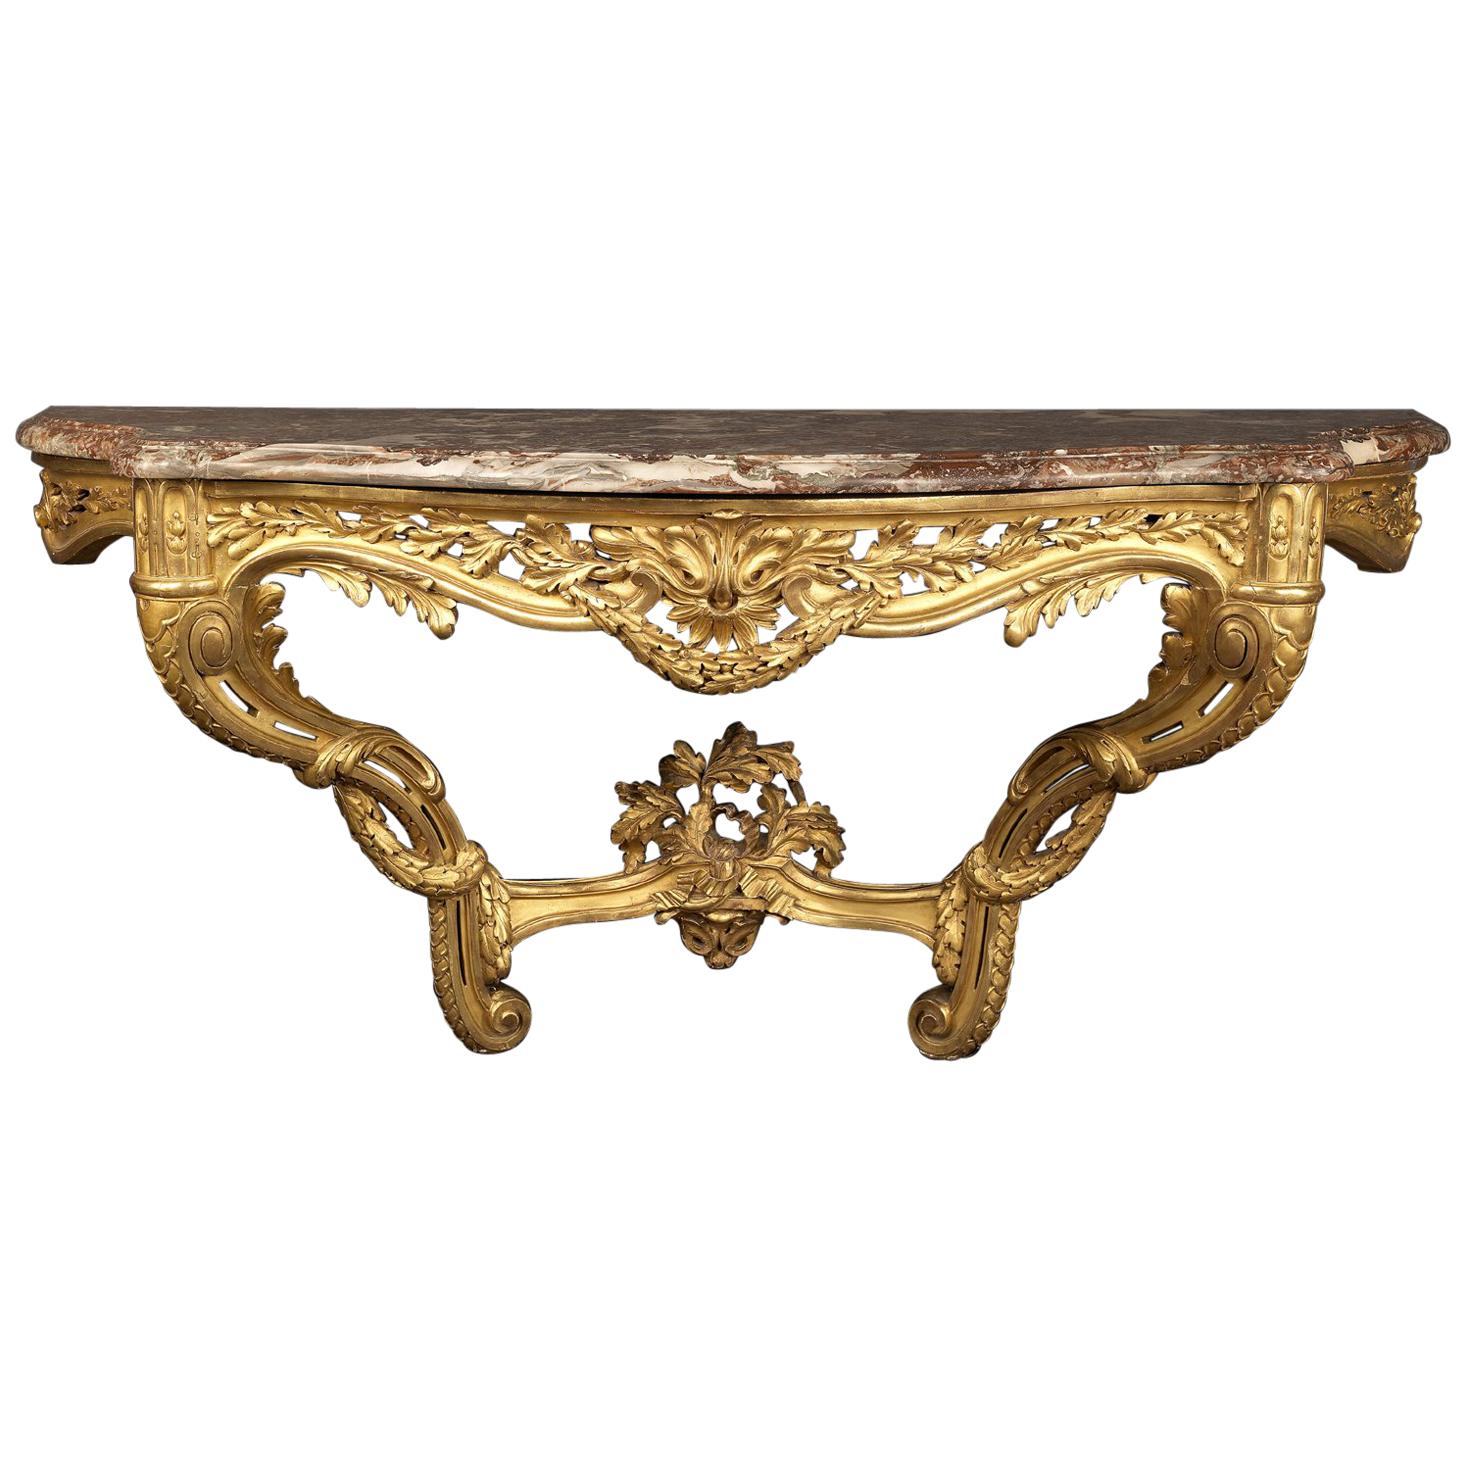 Transitional Style Carved Giltwood Console Table with a Marble Top, circa 1880 For Sale